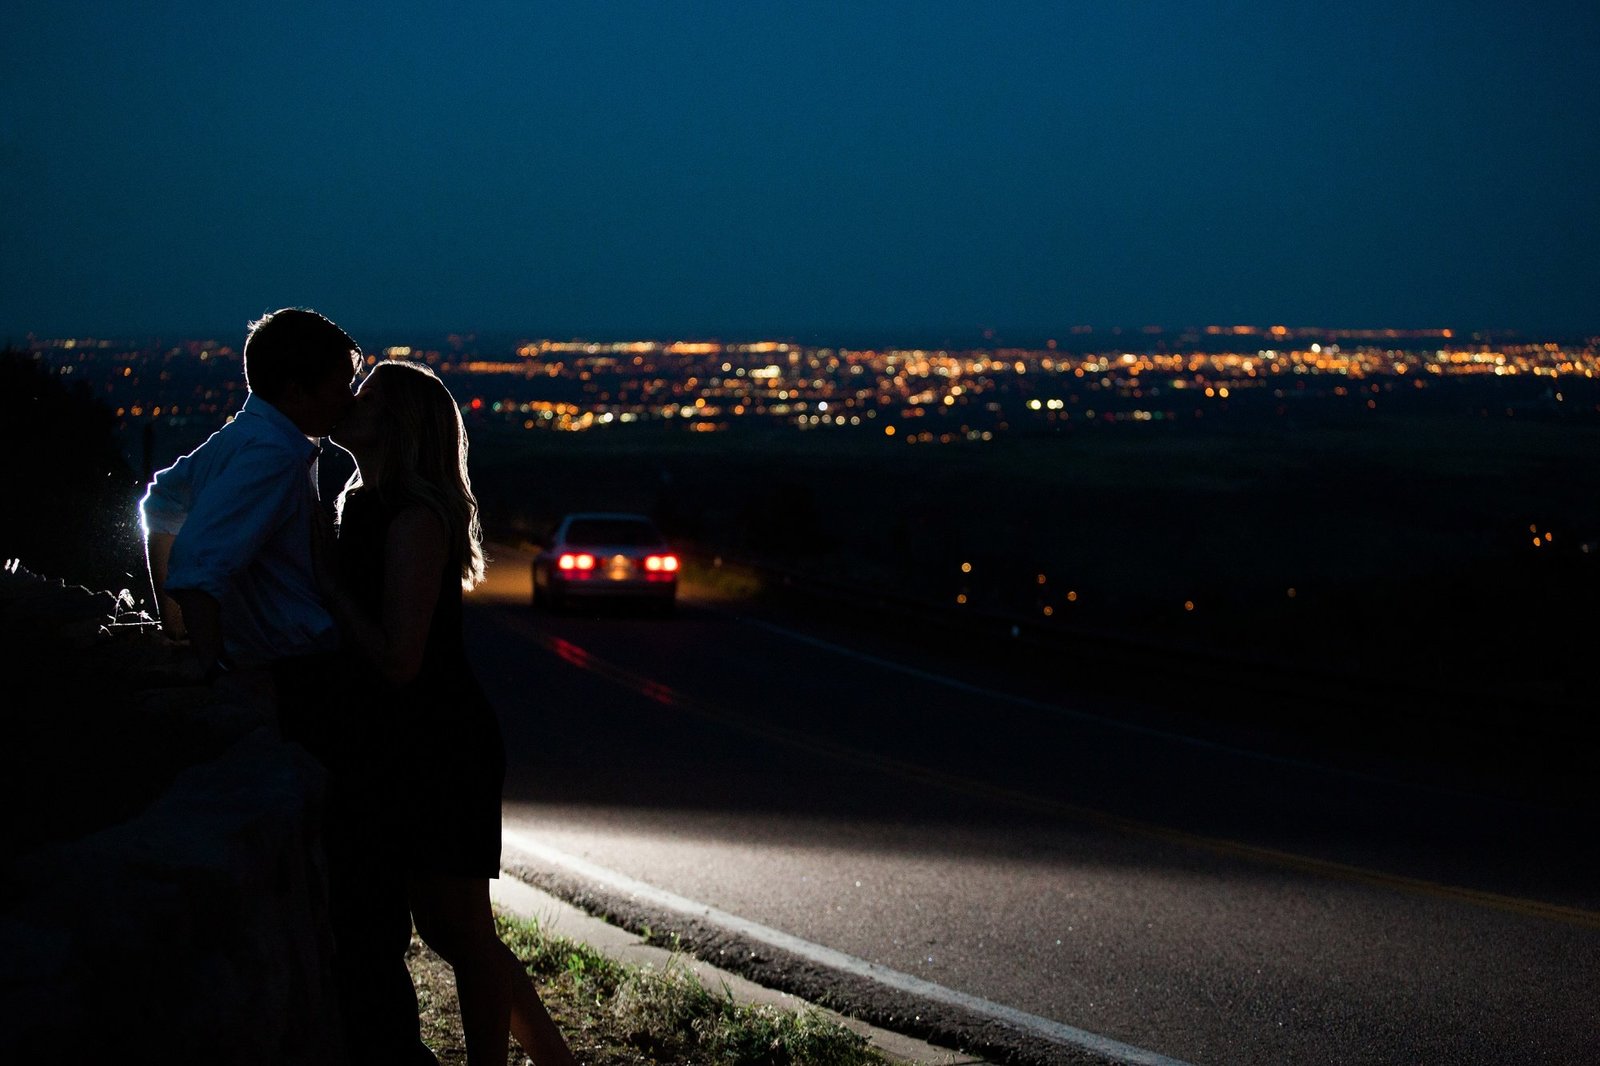 Engagements -Denver Lookout Mountain Engagement Session Golden Colorado Wedding Photographer Overlook City Lights Nature Outdoors Valley Light Couple (3)